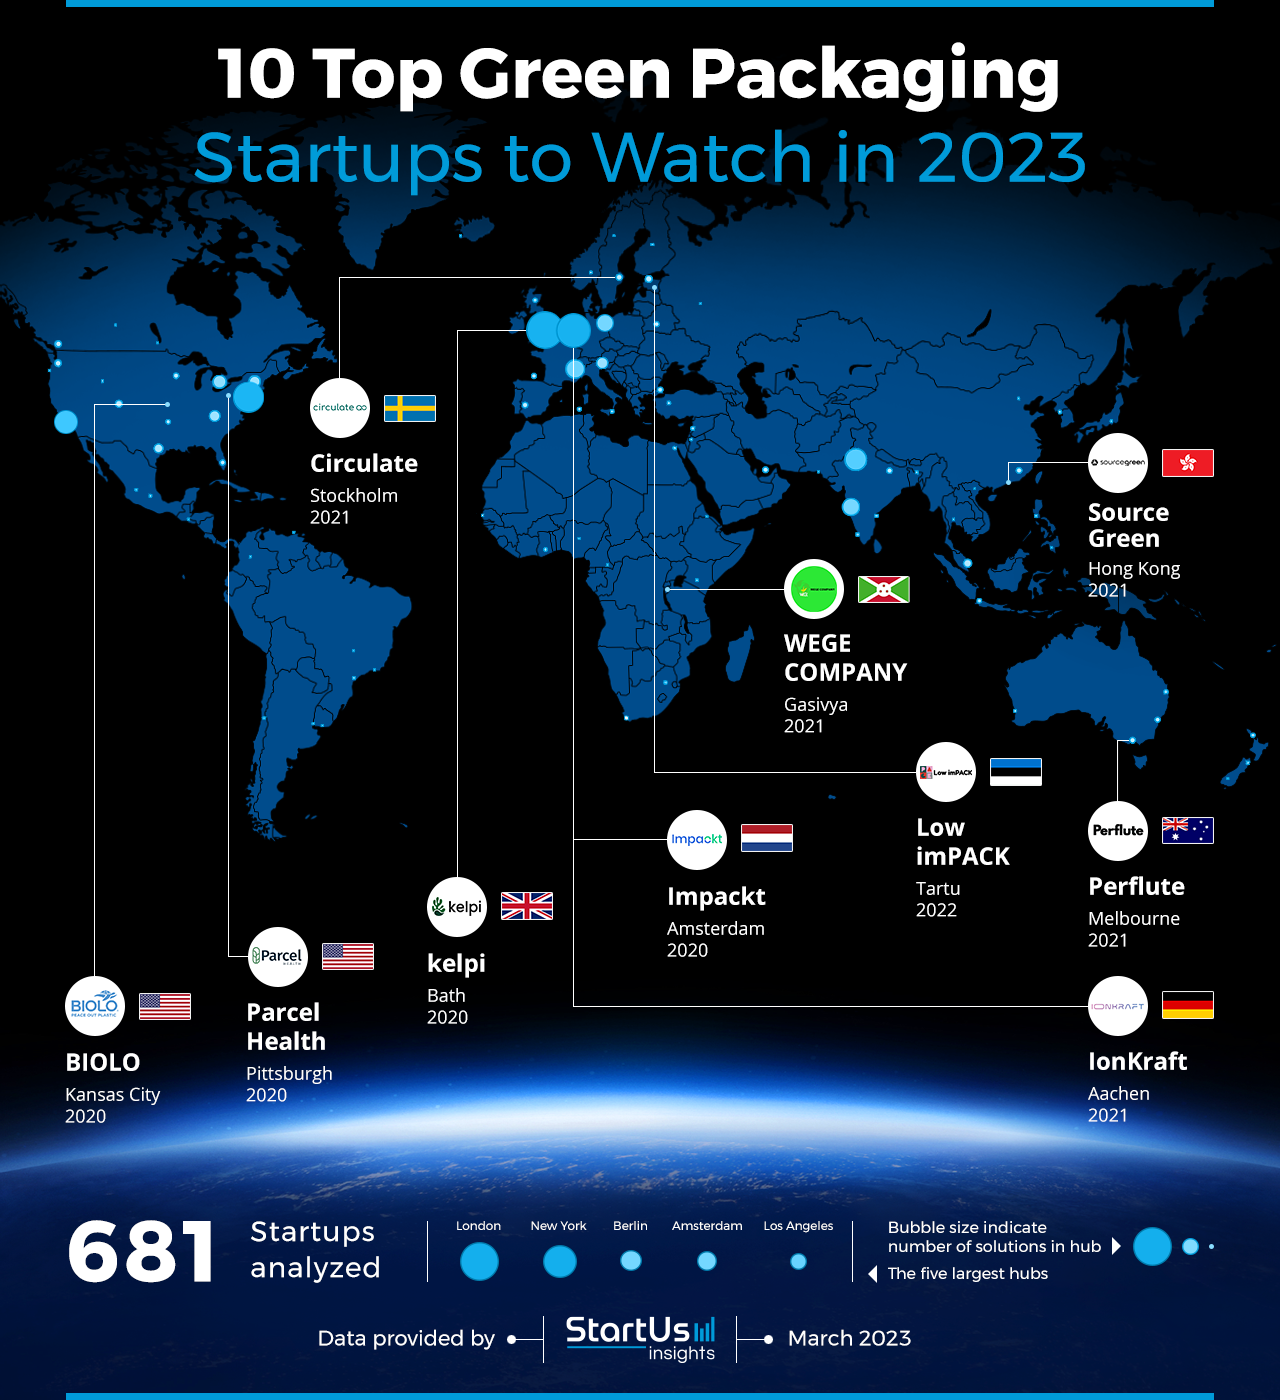 Green-Packaging-Startups-to-Watch-Heat-Map-StartUs-Insights-noresize